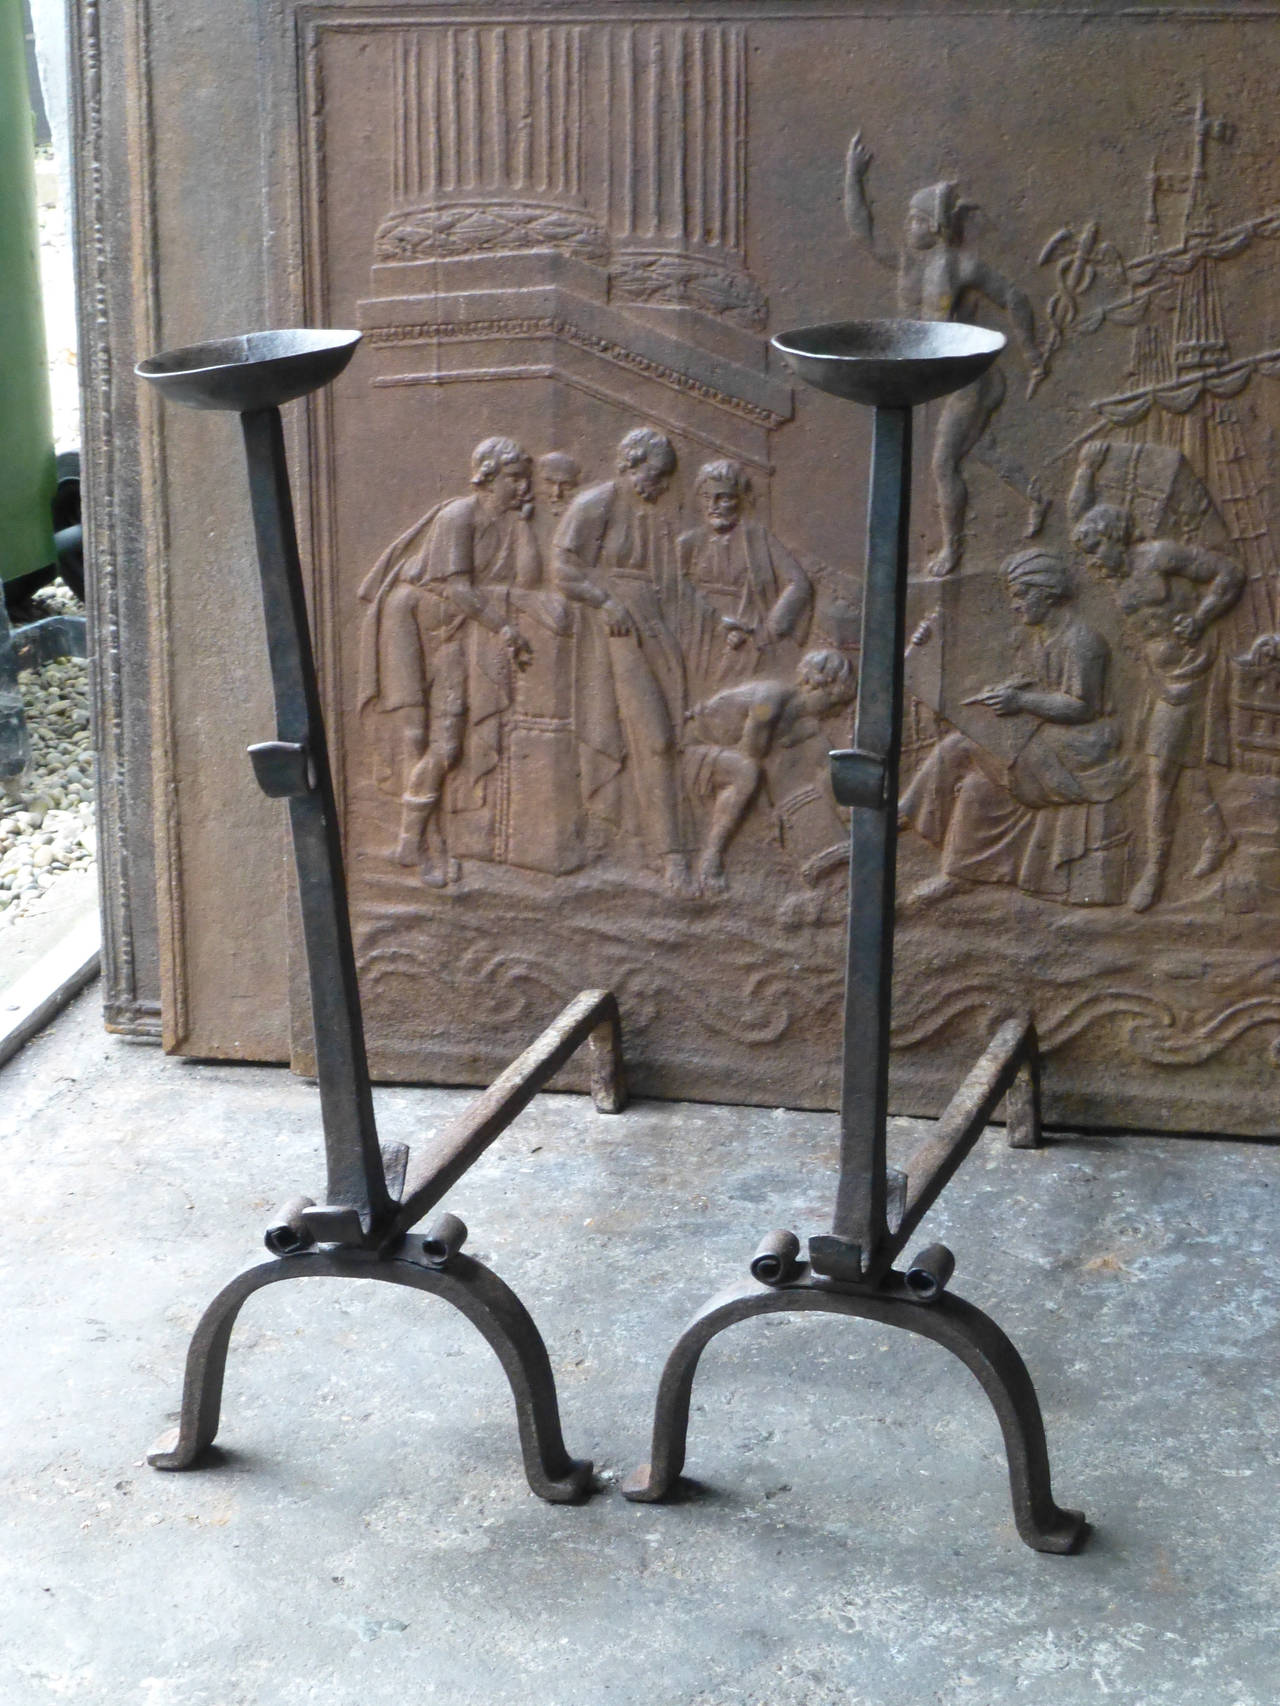 18th Century Wrought Iron Firedogs. These French andirons are called 'landiers' in France. This dates from the times the andirons were the main cooking equipment in the house. They had spit hooks to grill meat or poultry and sometimes a cup to keep